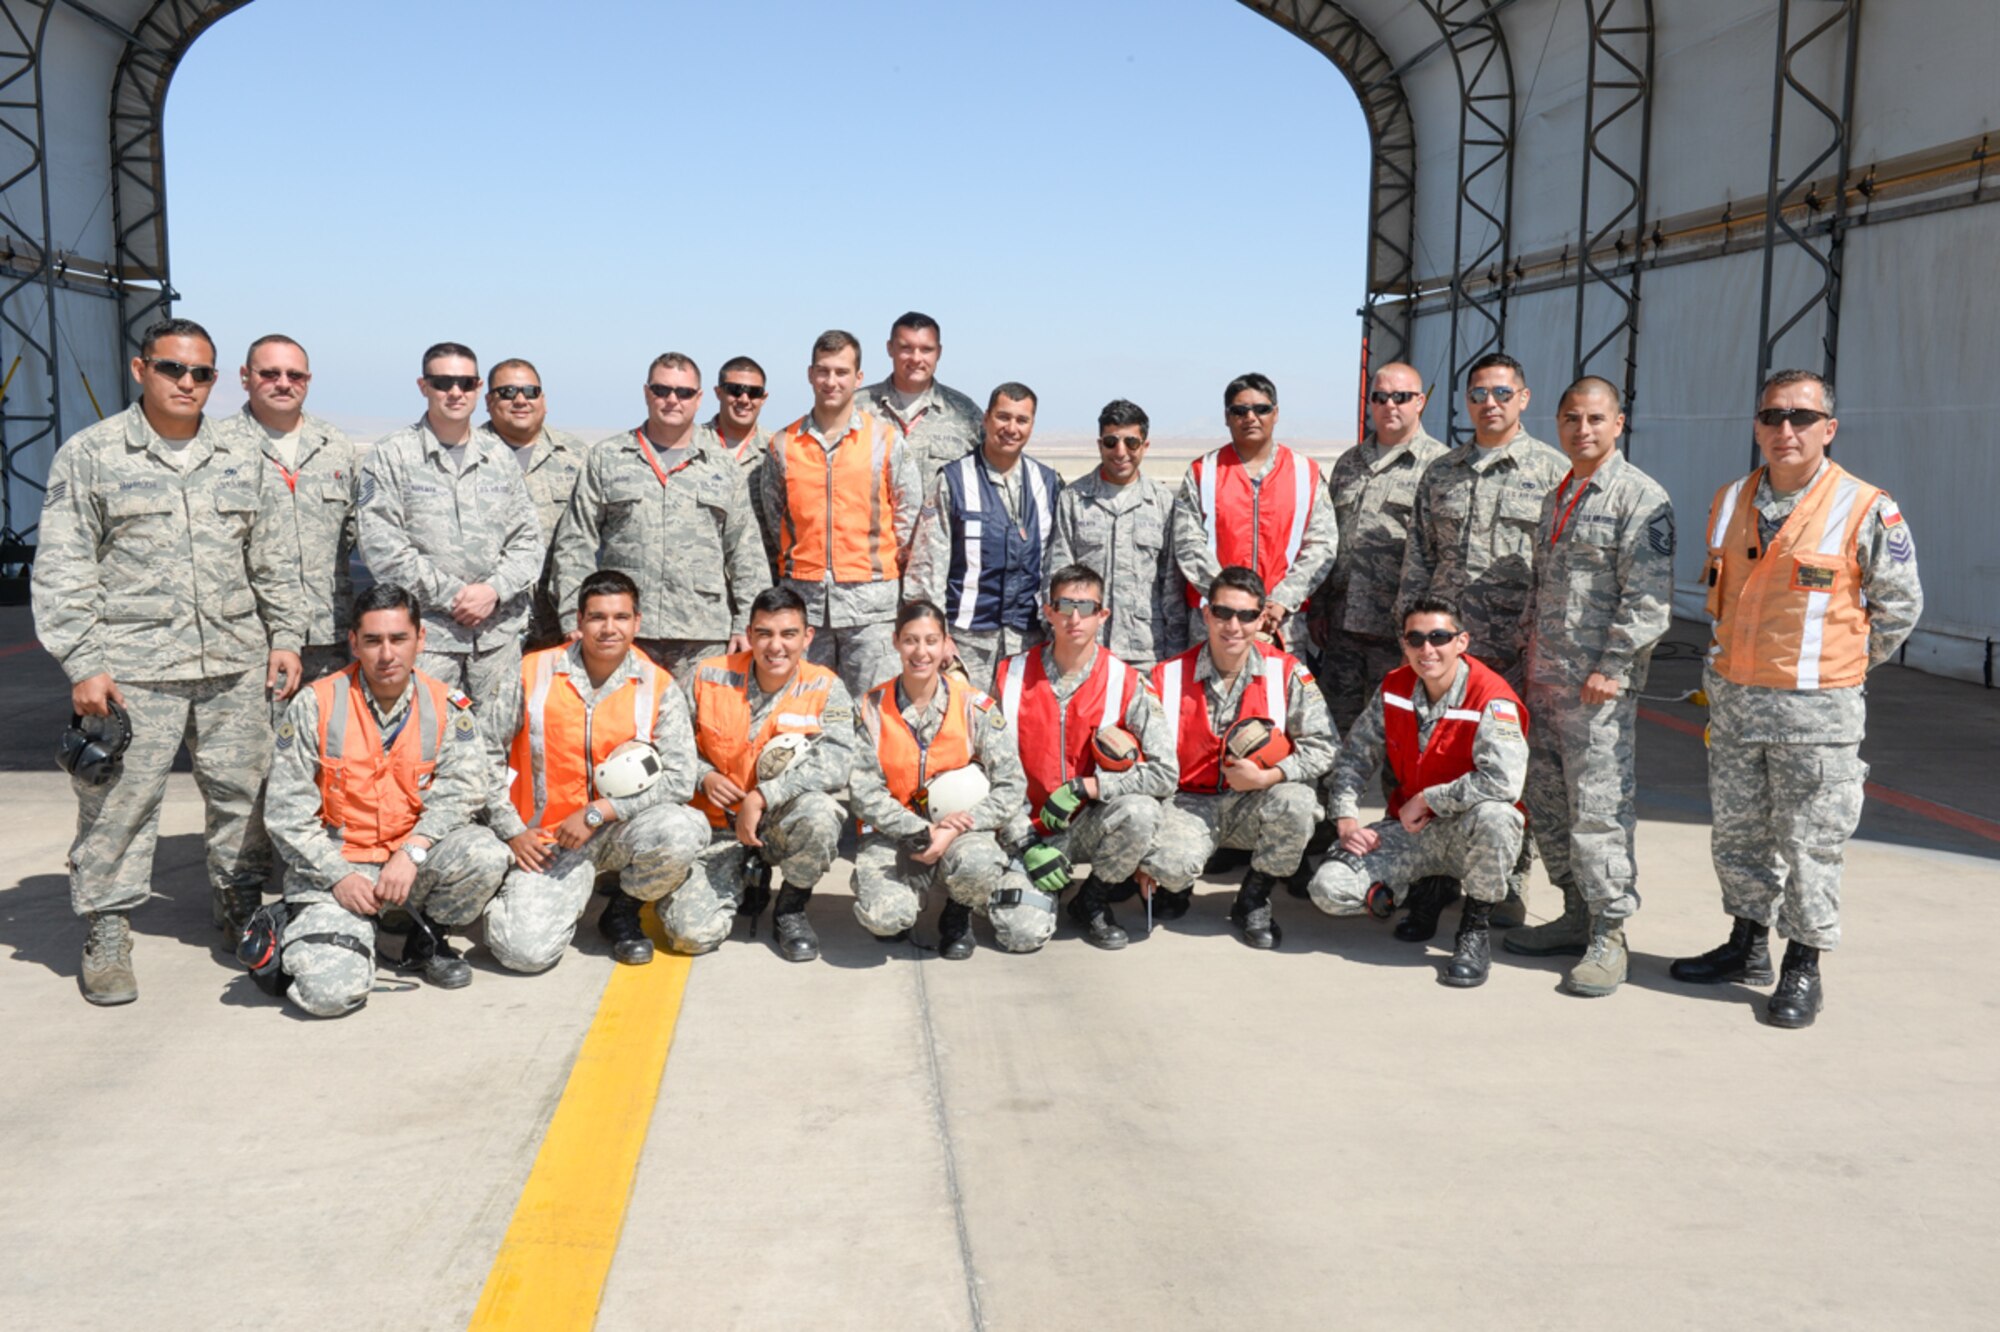 F-16 crew chiefs from the 149th Fighter Wing, Texas Air National Guard and the Chilean air force, work together during the State Partnership Program at Cerro Moreno Air Force Base, Chile, as part of a multi-national exercise, Salitre 2014, Oct. 10. Salitre is a Chilean-led exercise where the U.S., Chile, Brazil, Argentina and Uruguay, focus on increasing interoperability between allied nations. (Air National Guard photo by Senior Master Sgt. Miguel Arellano/released)